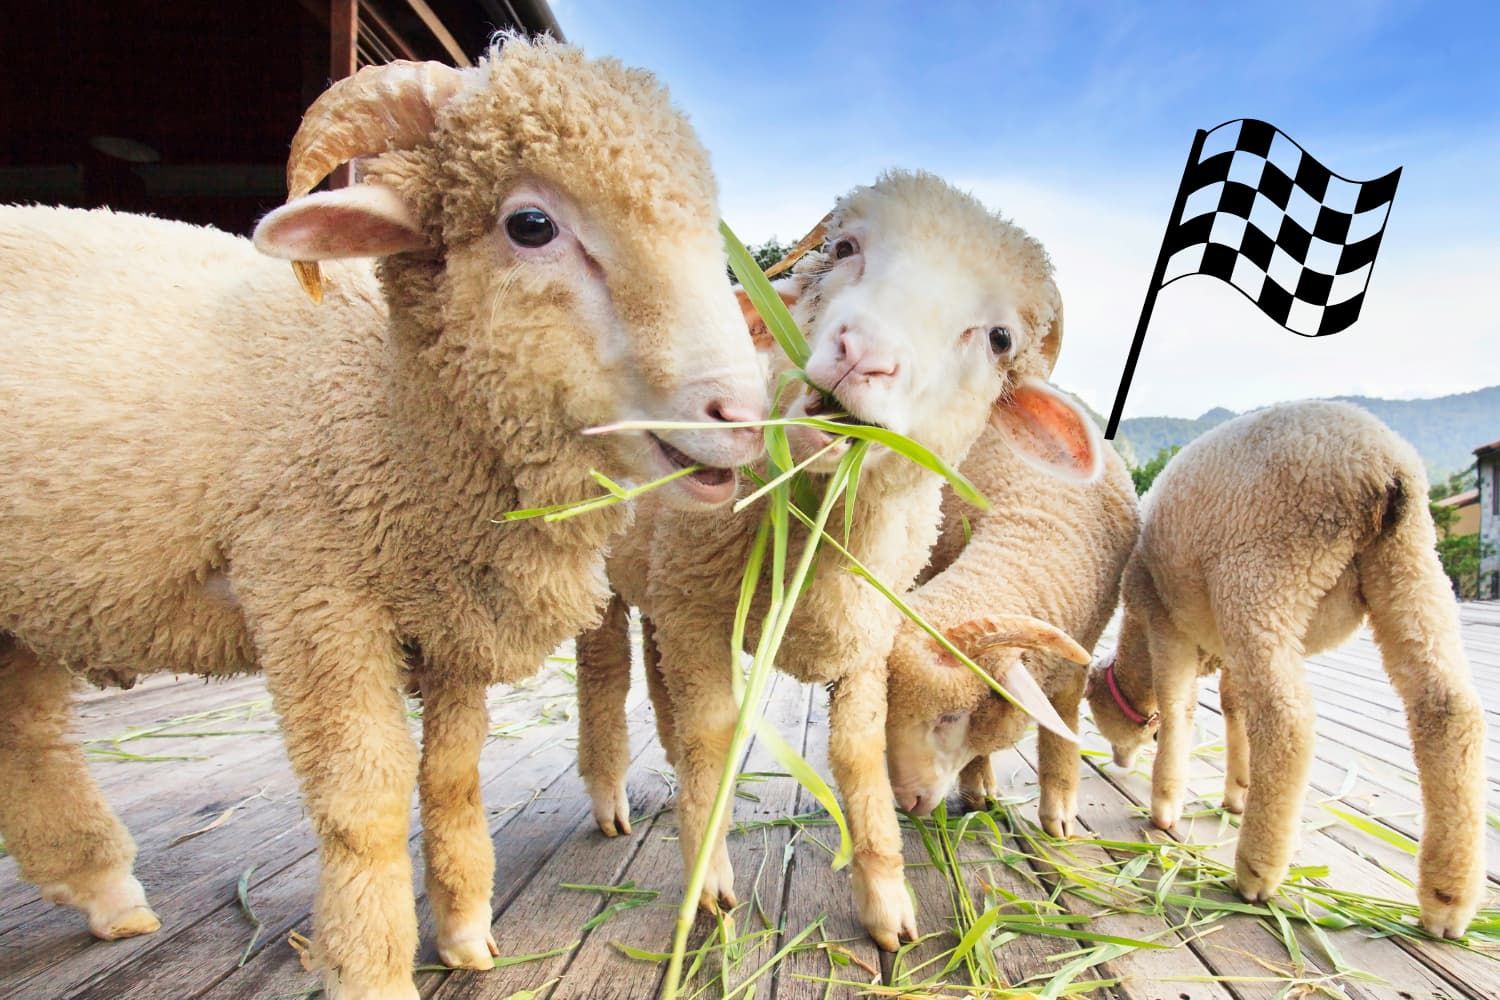 Game%20-%20OT%20Psalm%2023%20-%20The%20feed%20the%20sheep%20relay%20race-6bb58723 Suffering / illness